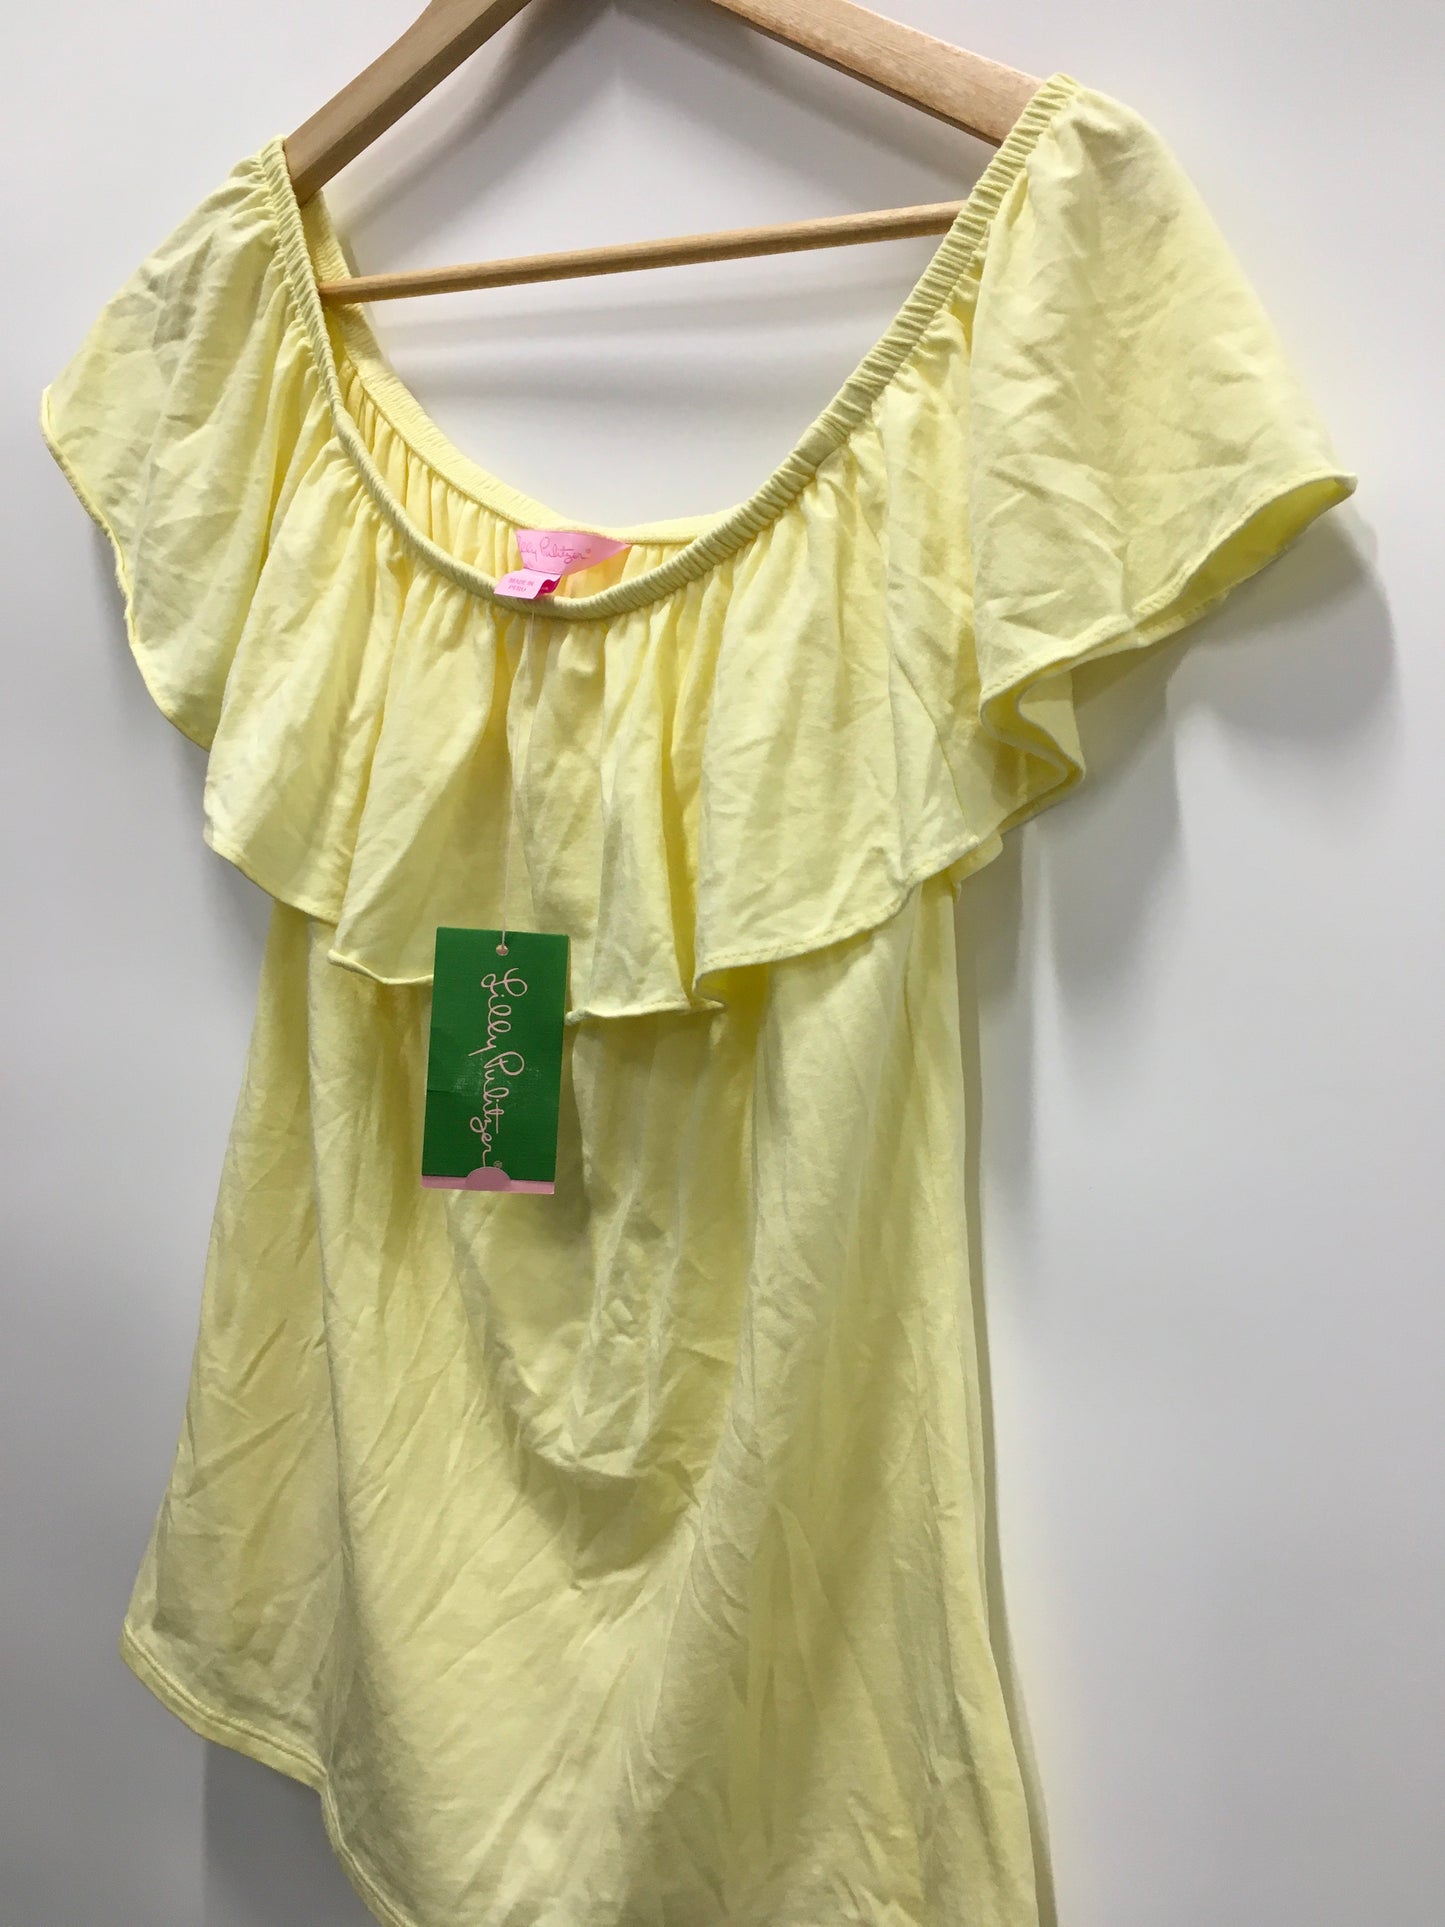 Top Short Sleeve By Lilly Pulitzer  Size: M